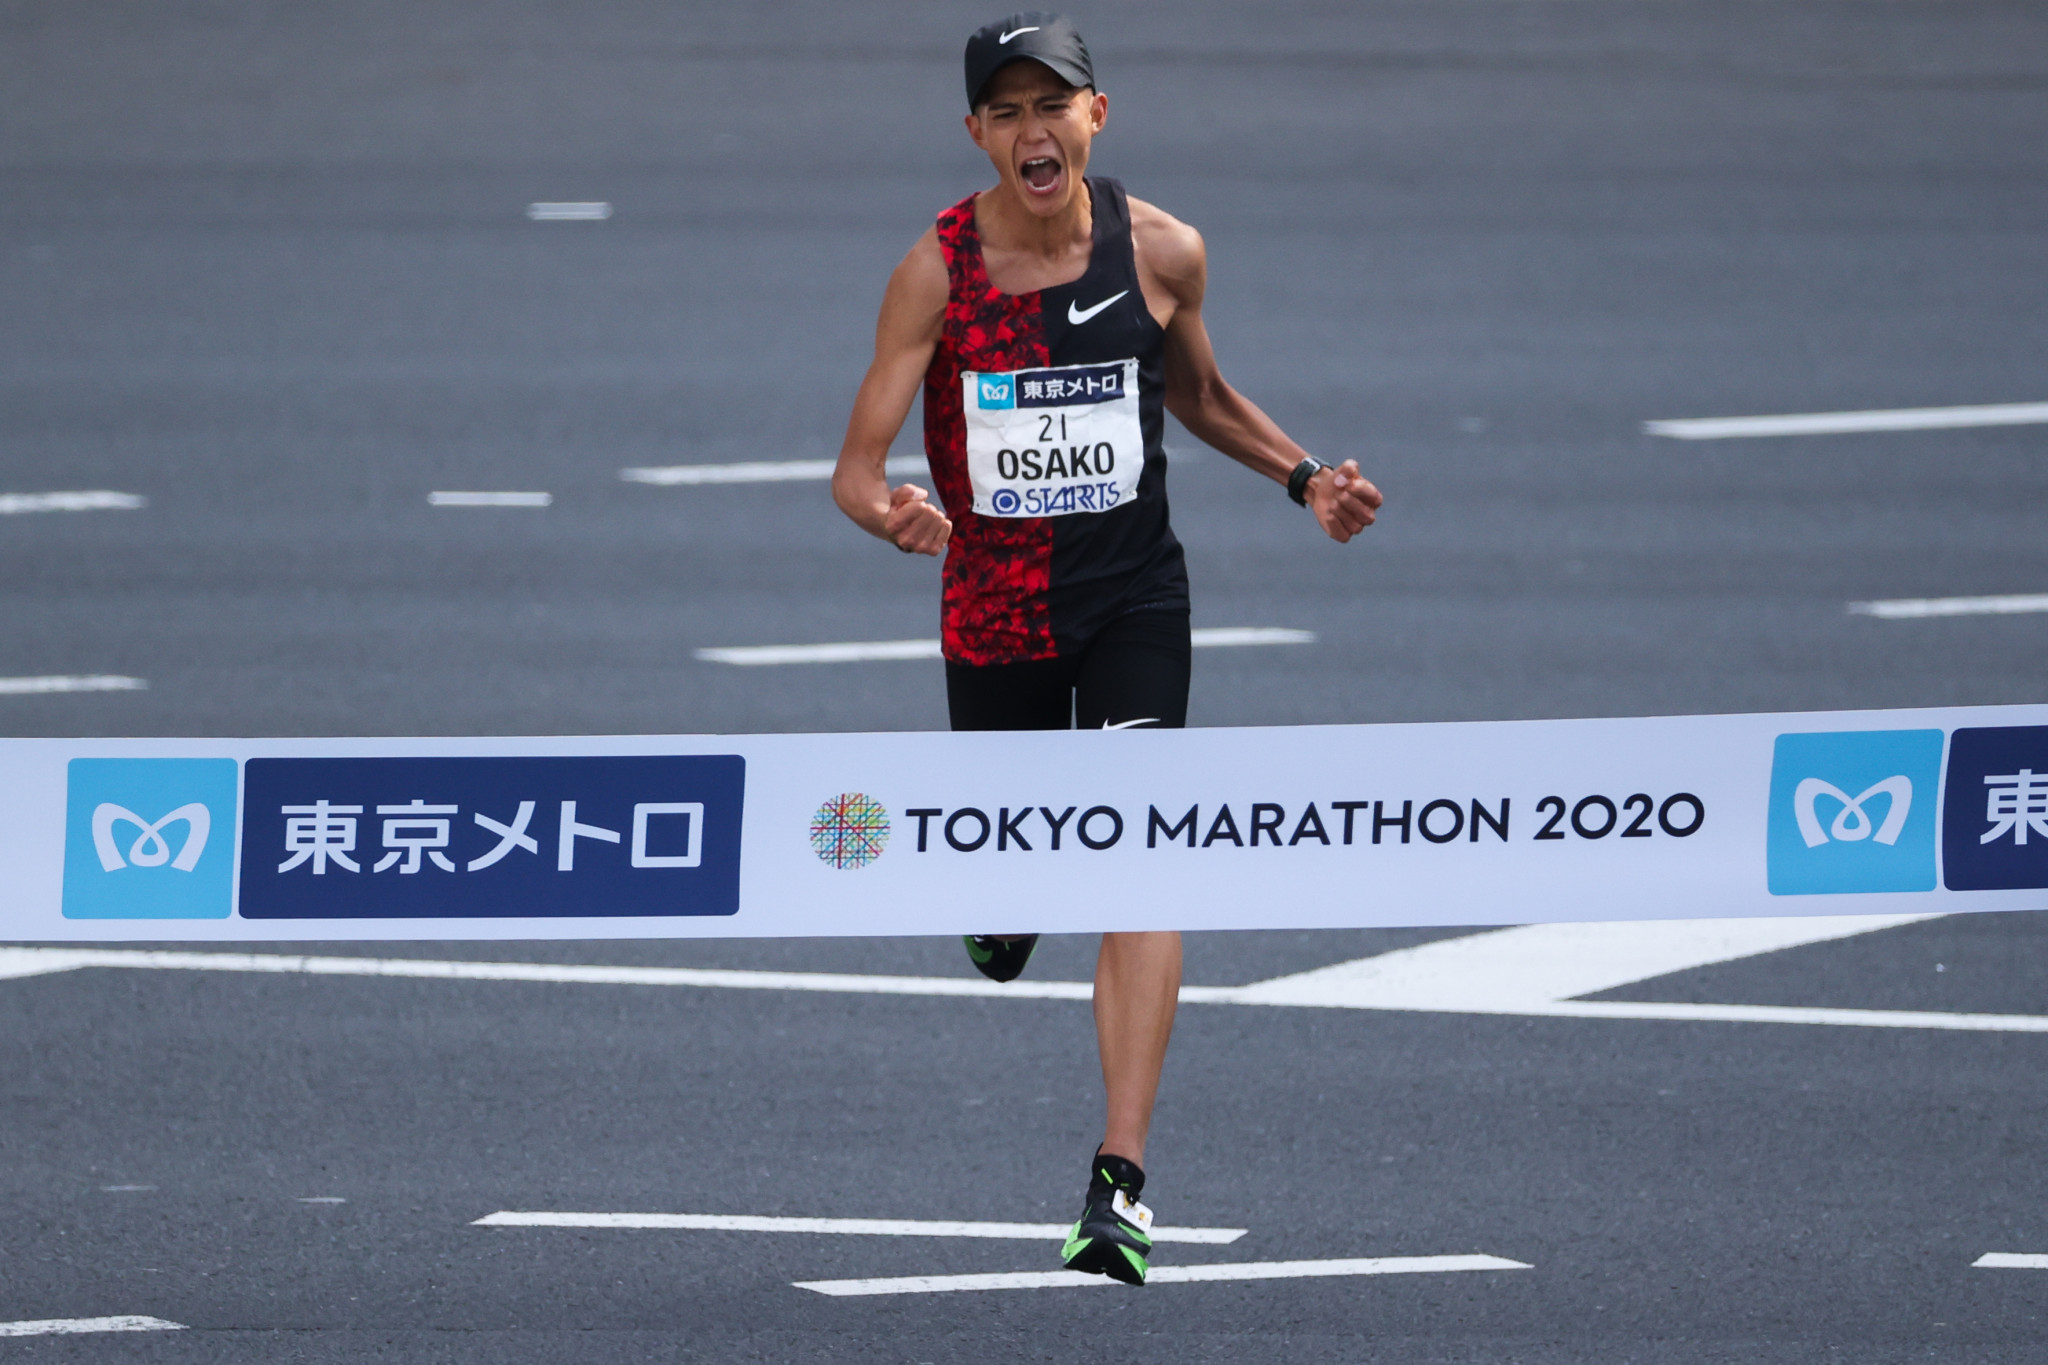 Suguru Osako qualified after his Tokyo Marathon national record was not bettered ©Getty Images